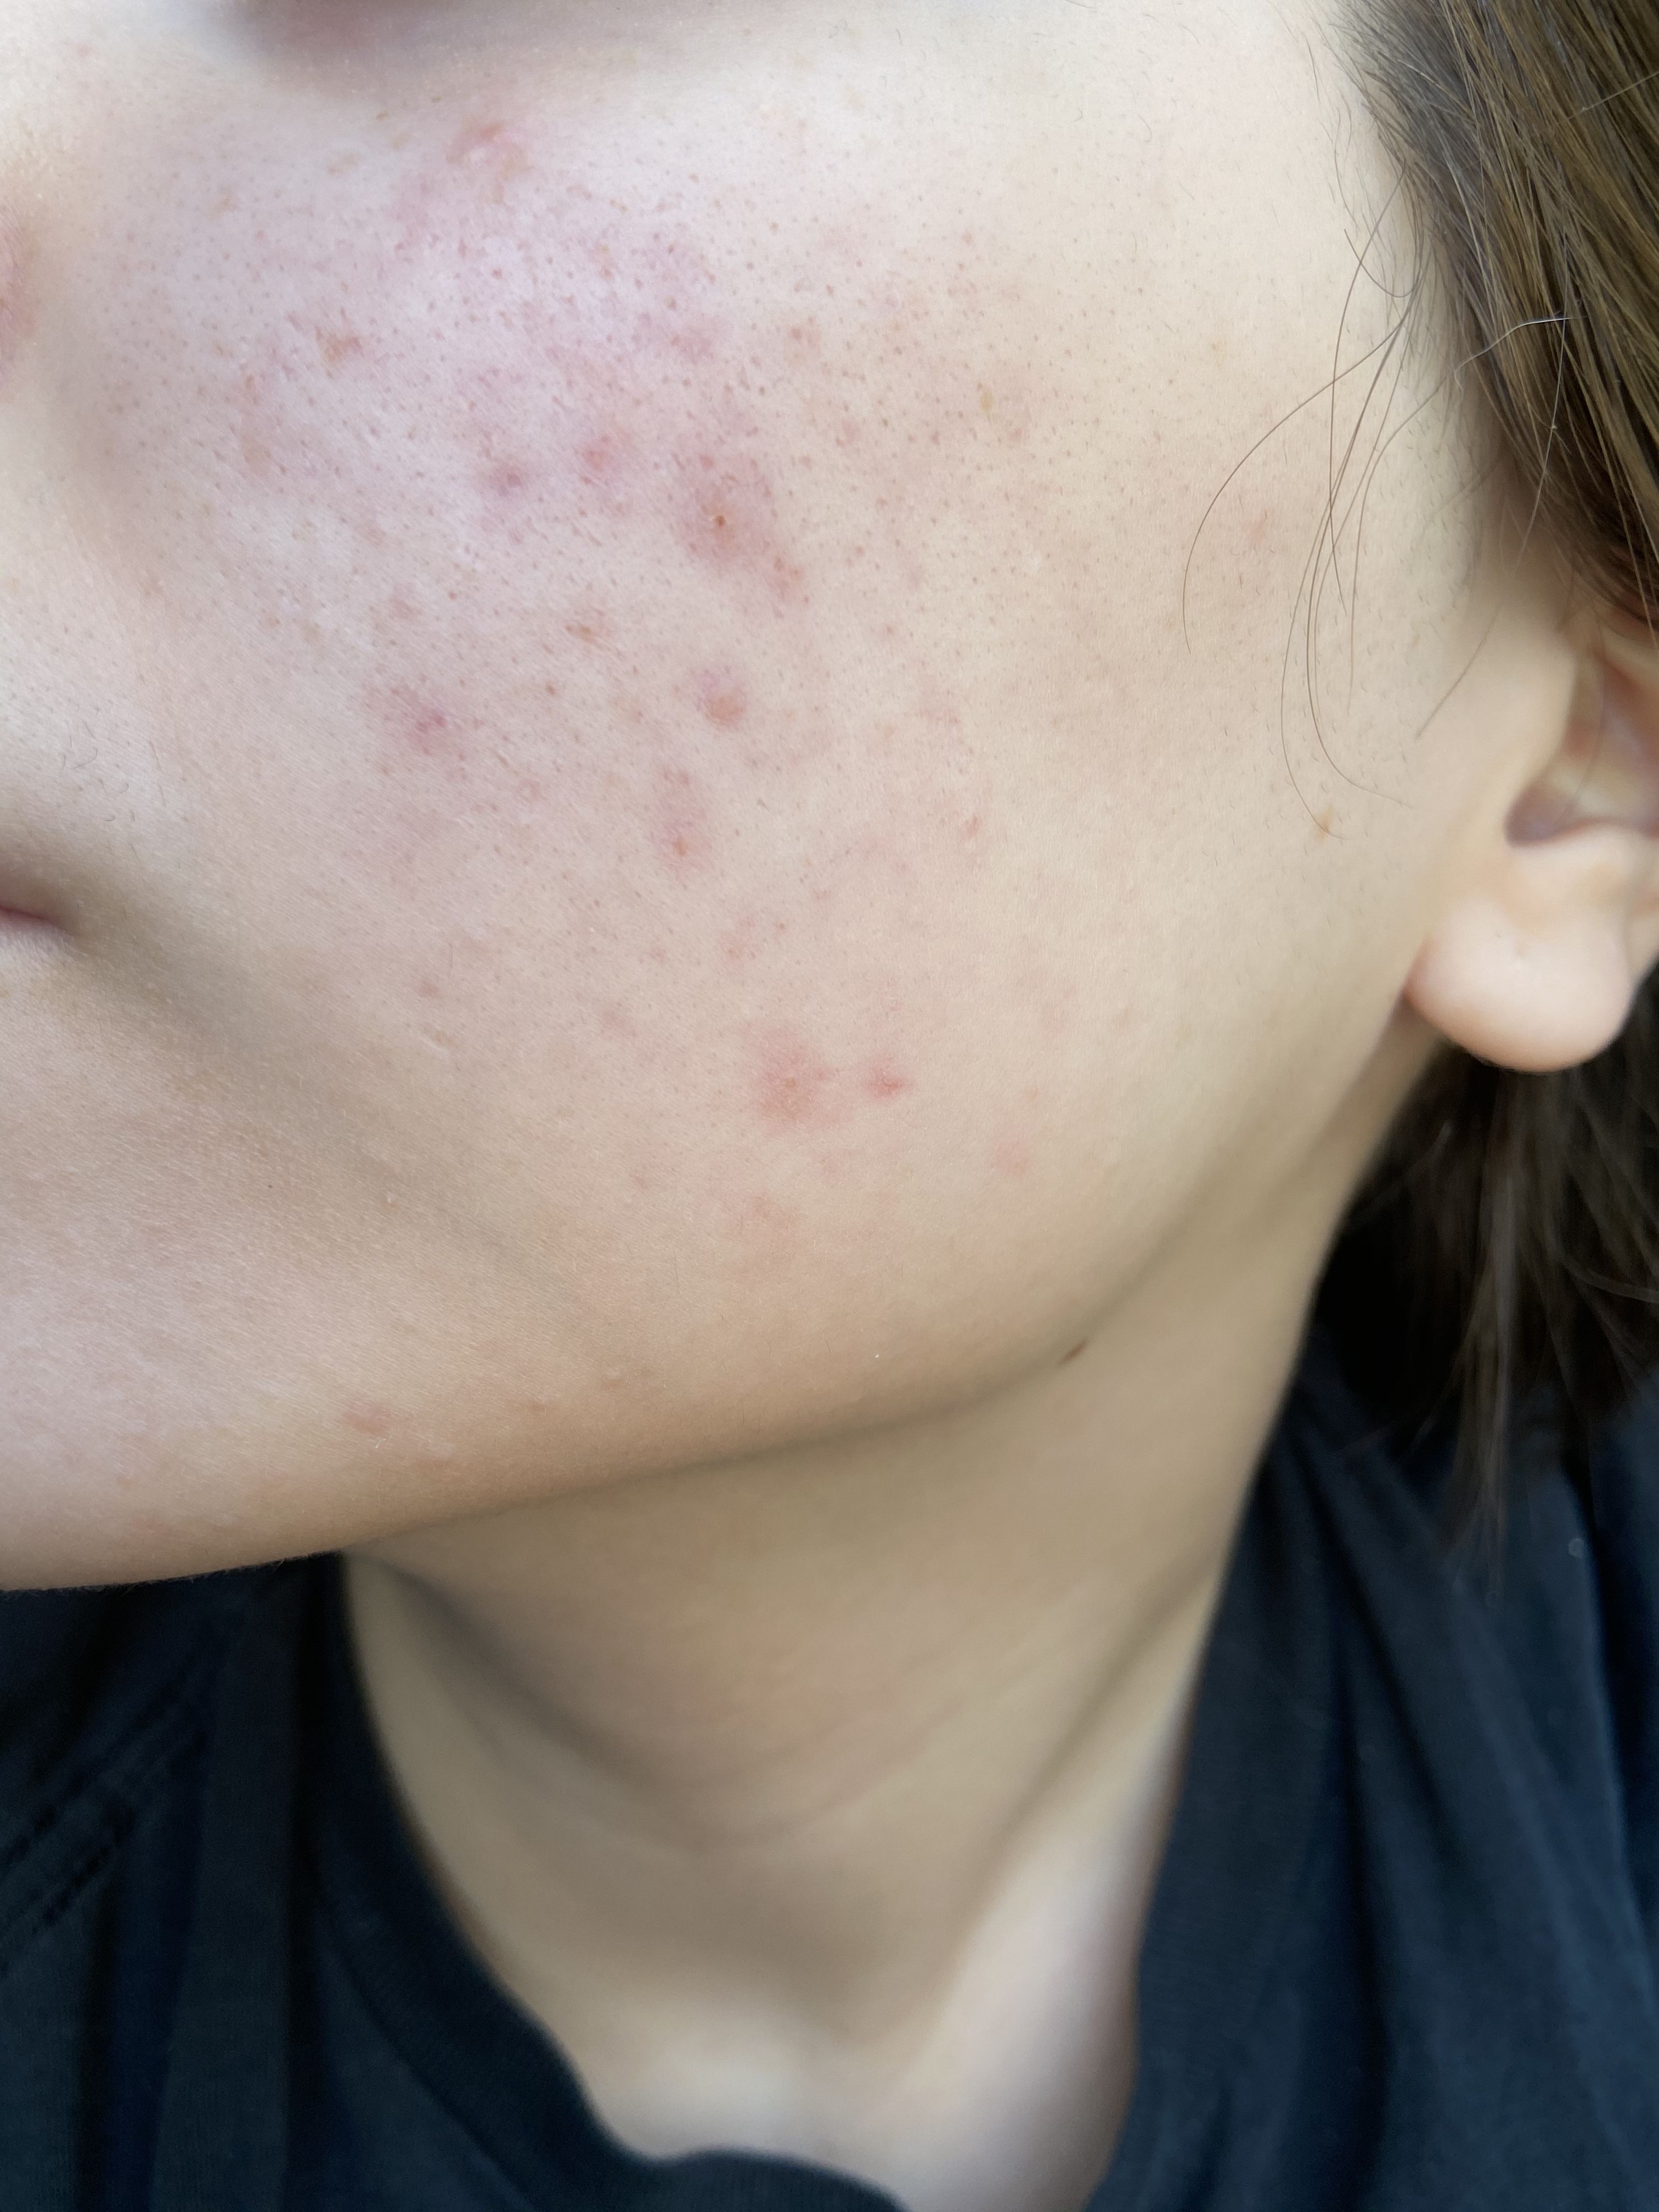 Do you think this is hyperpigmentation? - Hyperpigmentation - red/dark